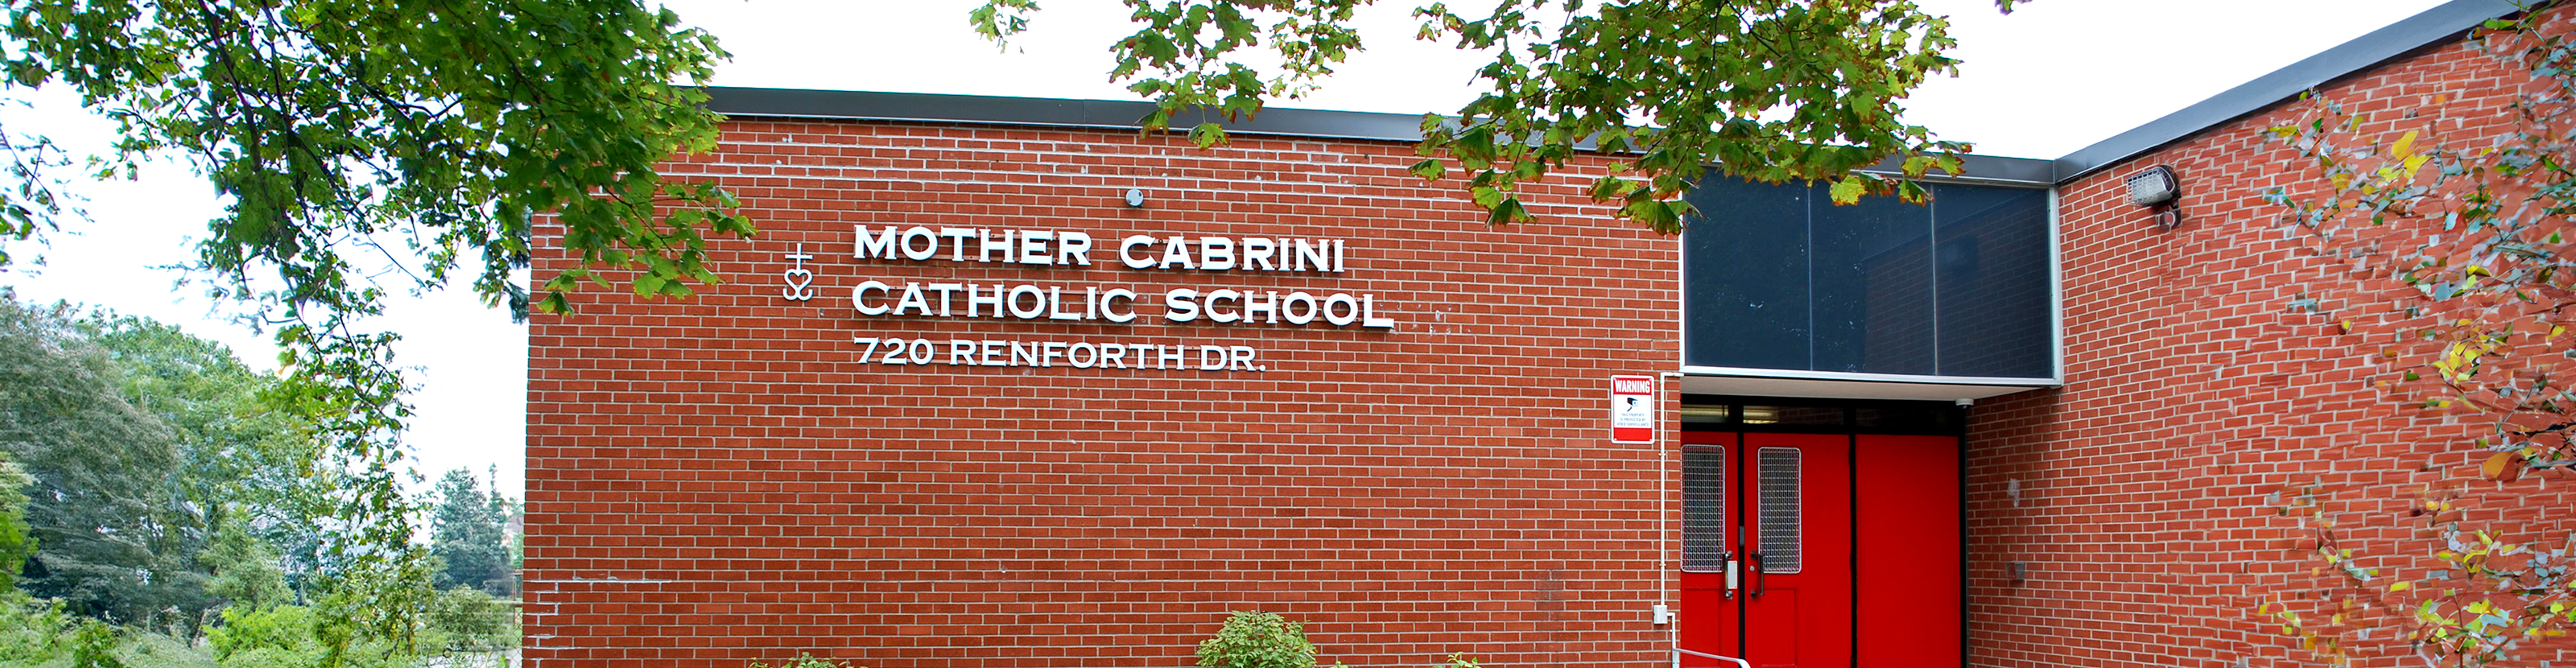 The front of the Mother Cabrini Catholic School building.